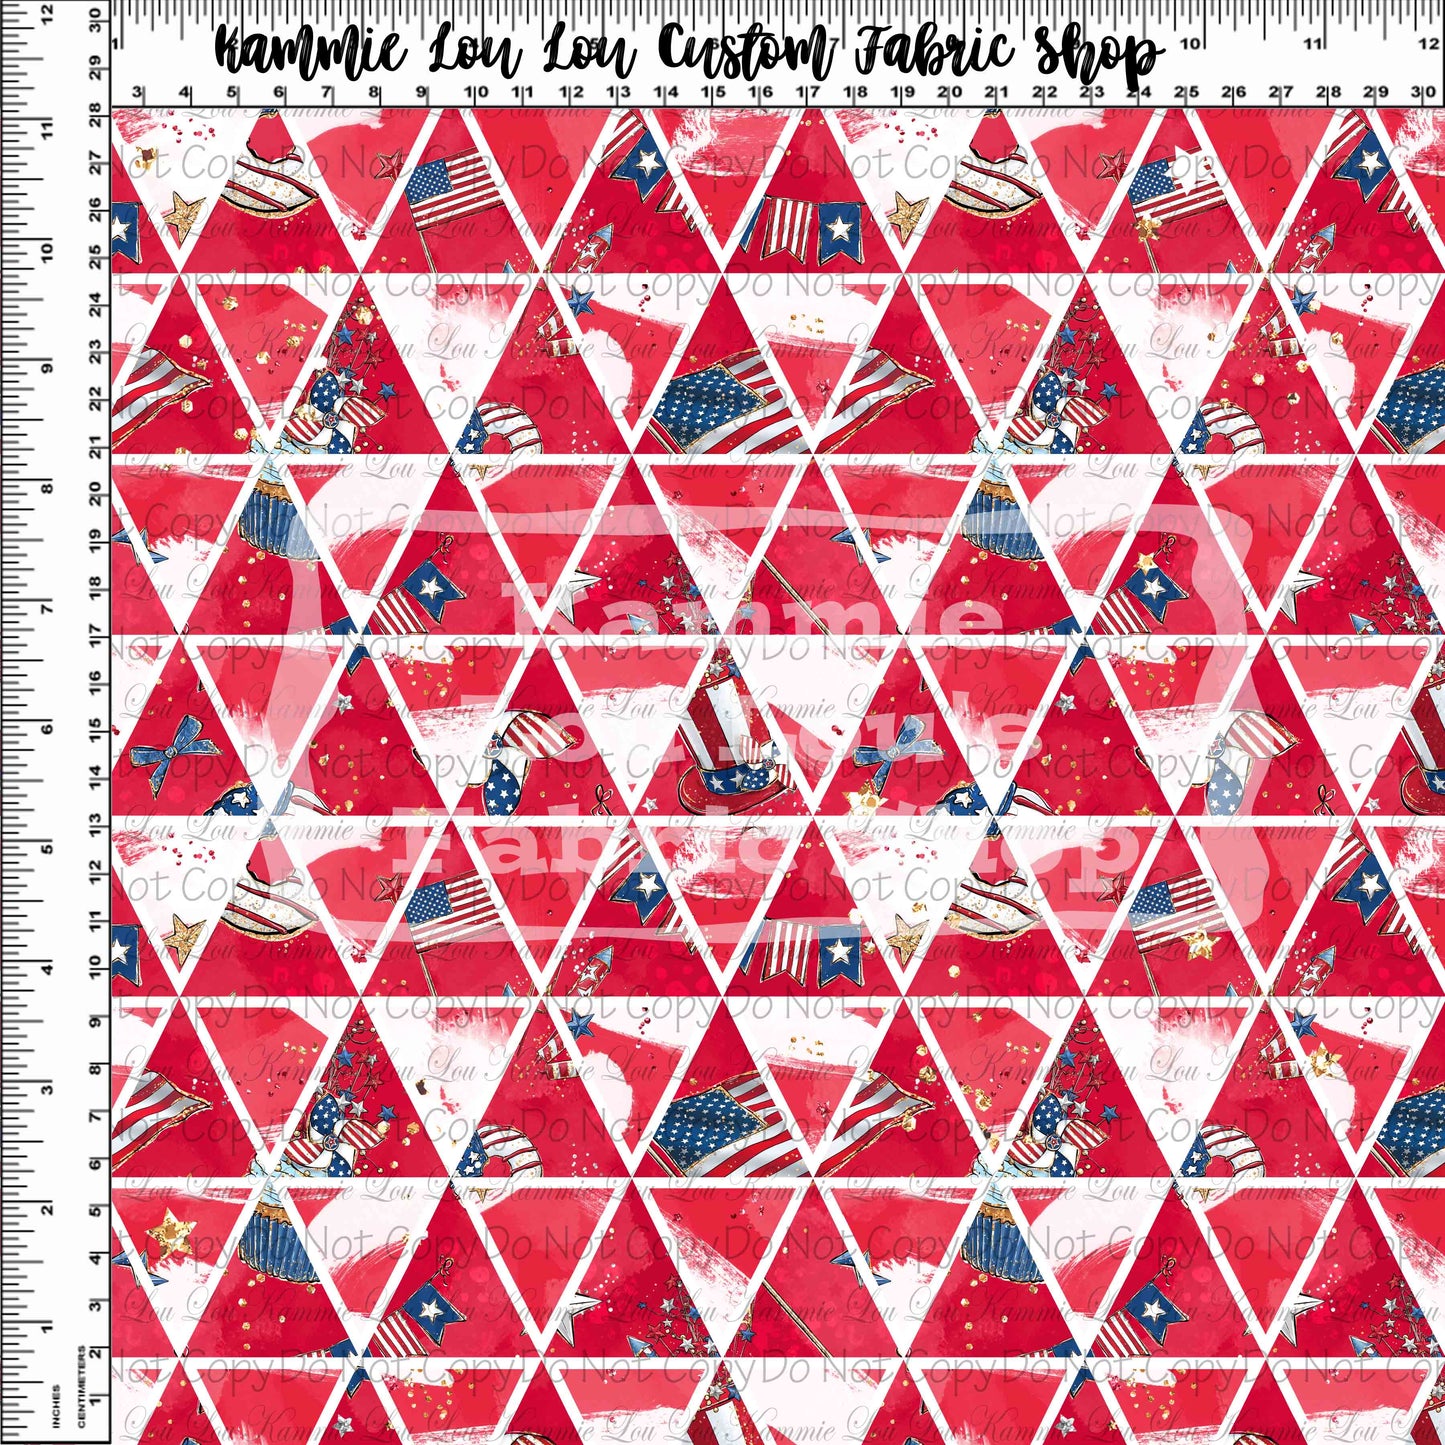 R116 Pre-Order Bless the USA - Main - Red Glitter Triangles